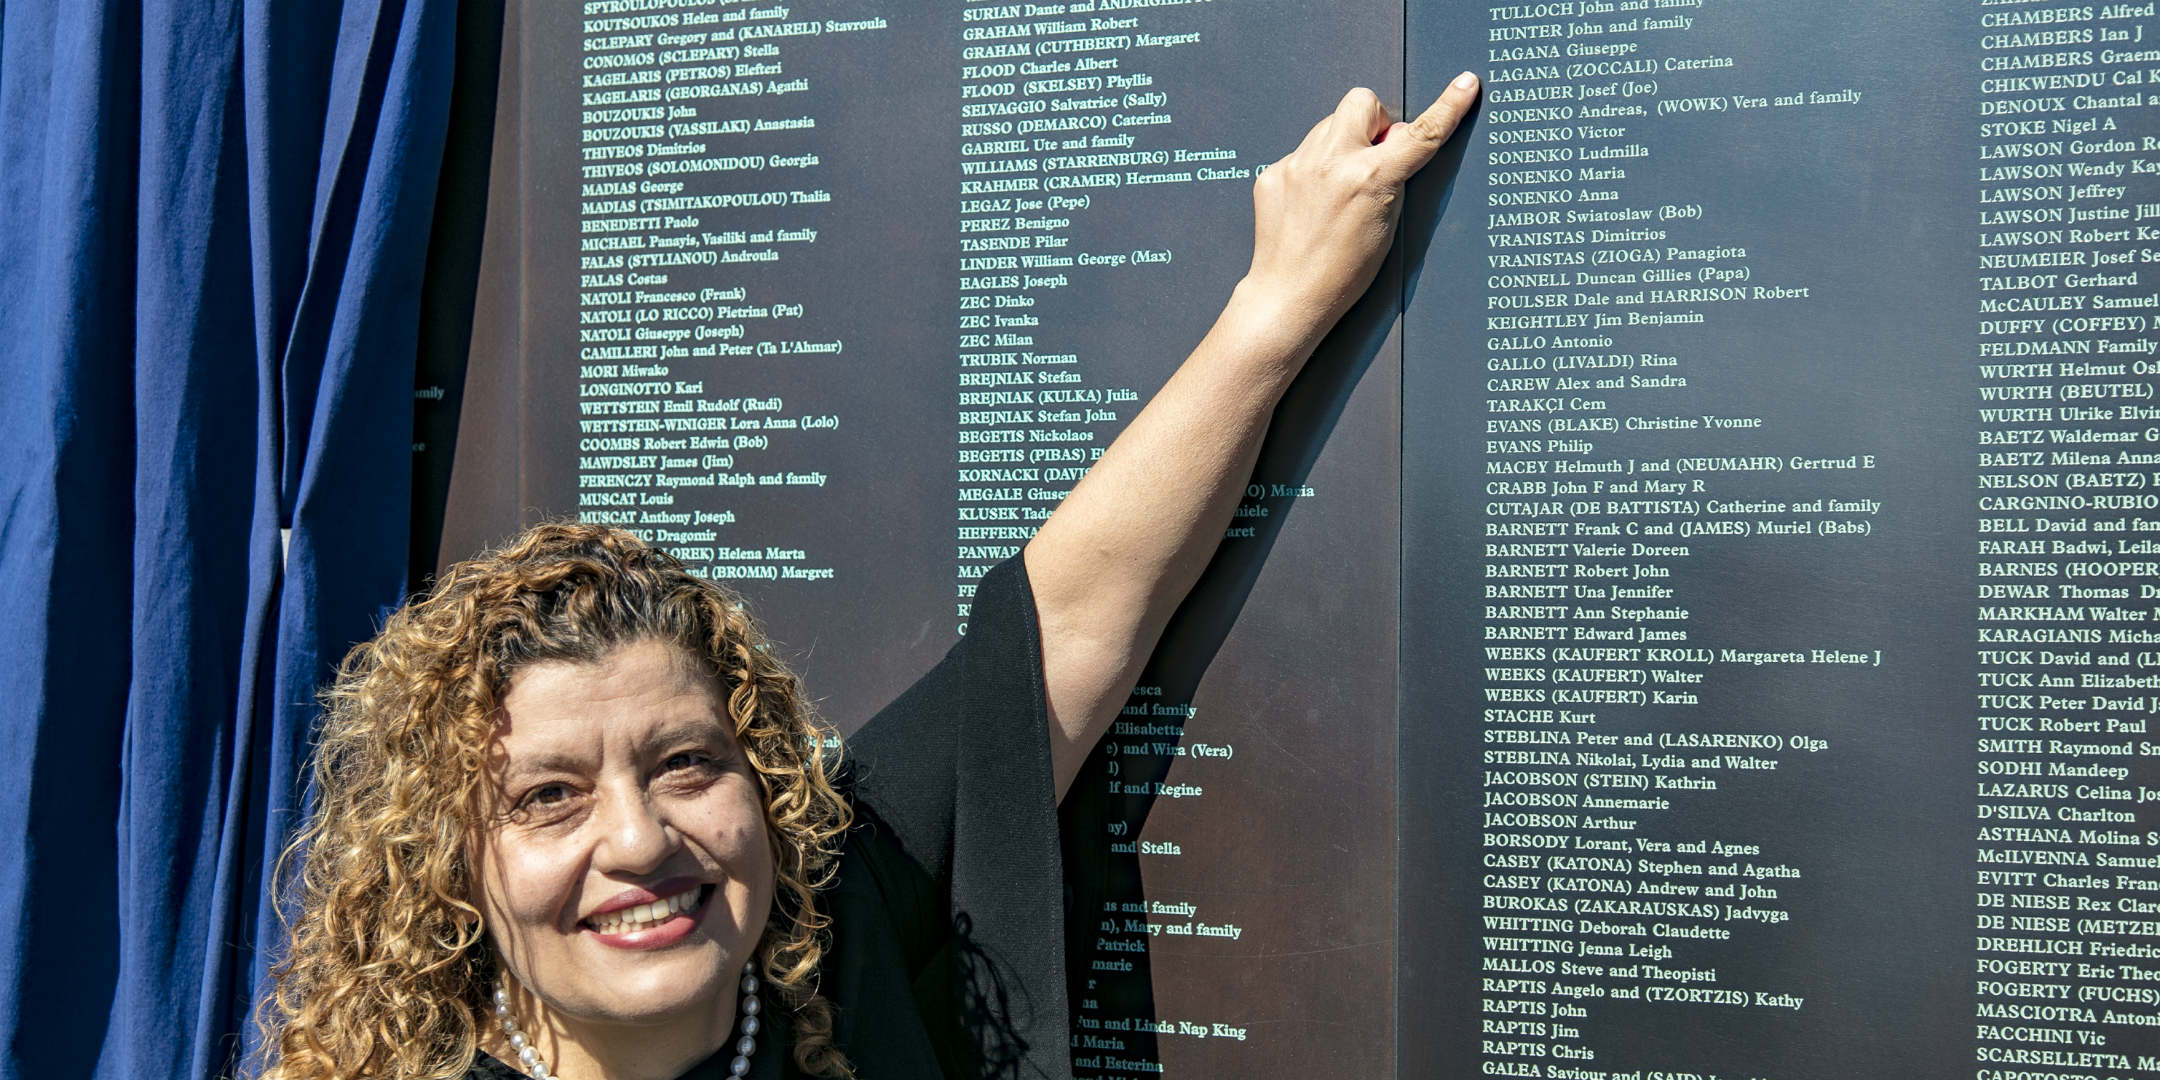 Welcome Wall unveiling ceremony, 7 May 2018. Mary Lagana, daughter of Giuseppe and Caterina from Calabria, Italy.